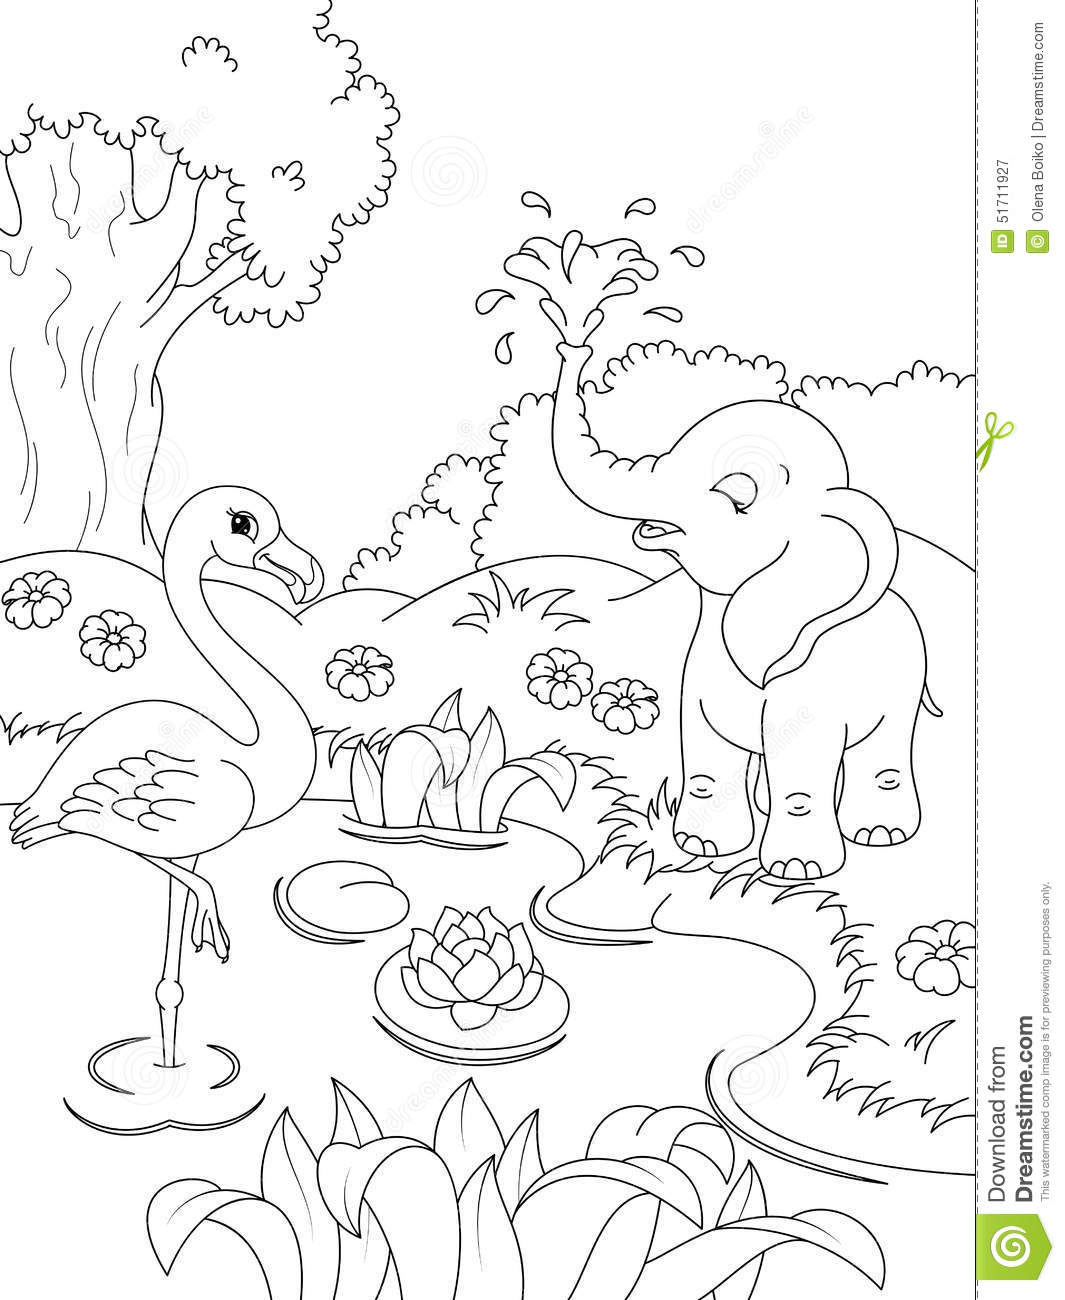 Nature coloring pages to download and print for free